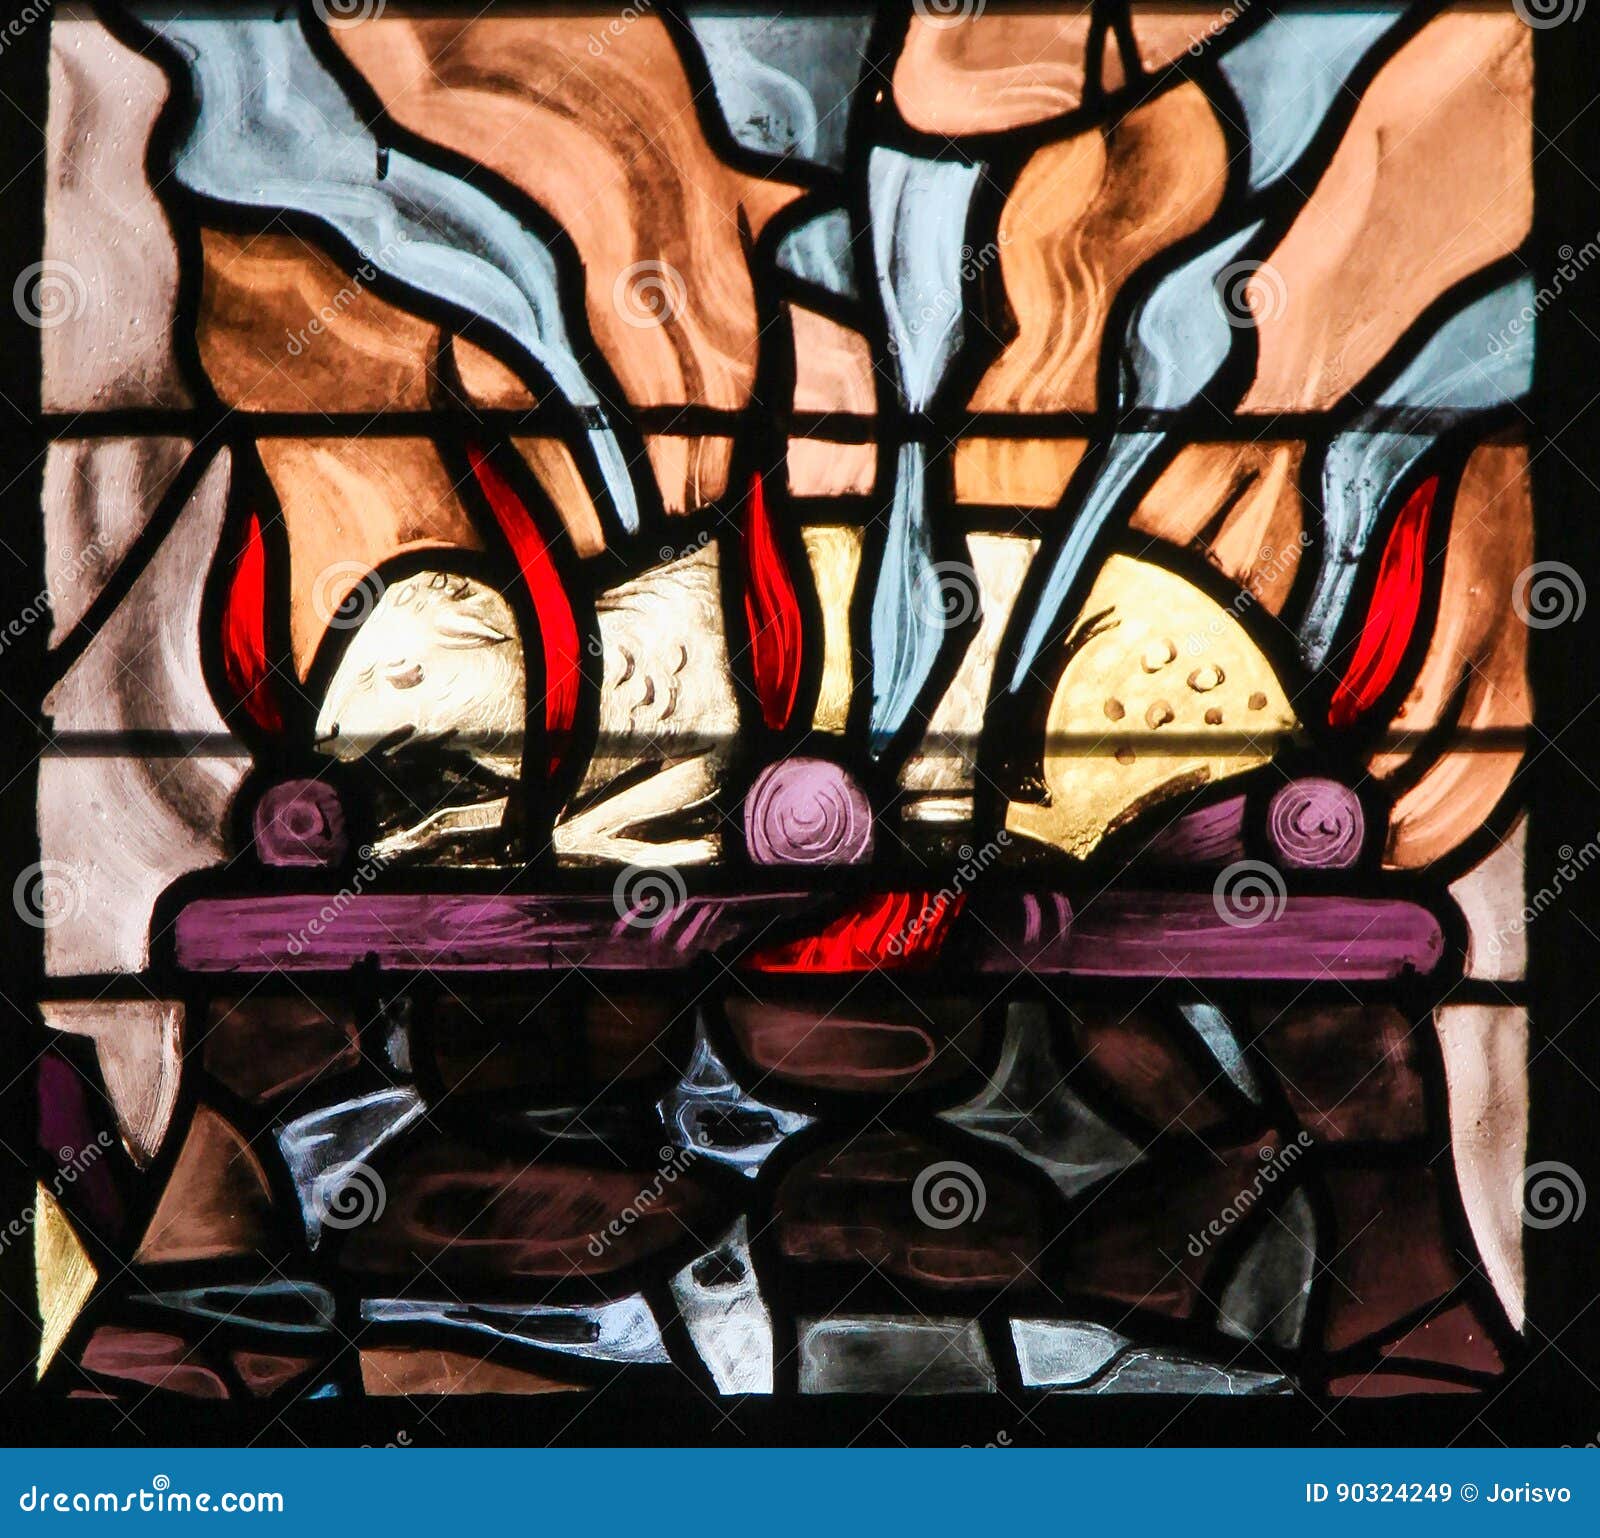 stained glass of a burning lamb, izing the agnus dei